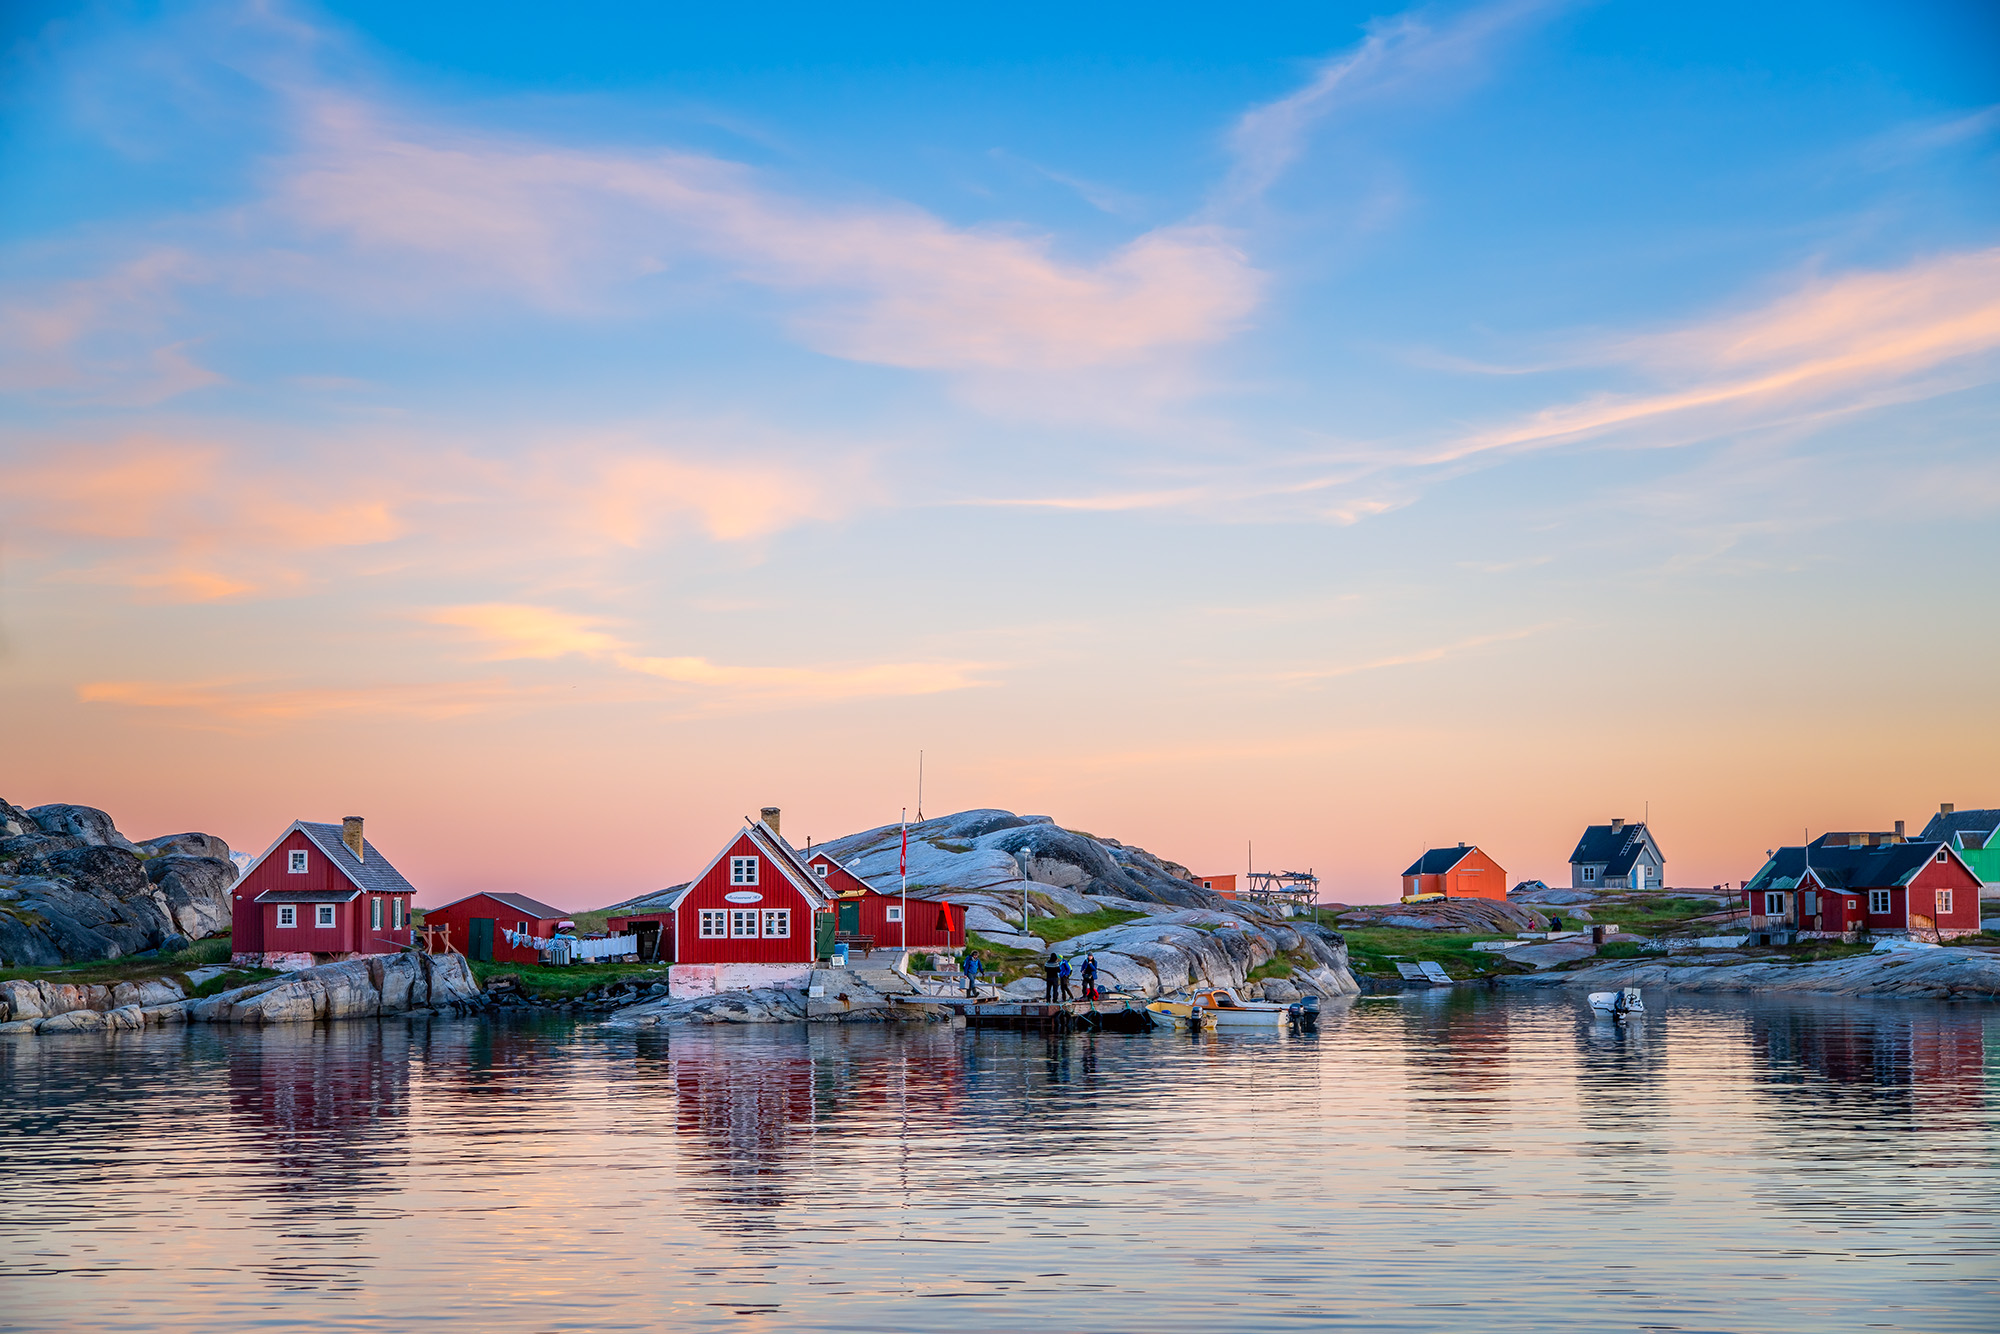 During our late July visit to Greenland, we ventured into the village of Oqaatsut, where the midnight skies painted a beautiful...